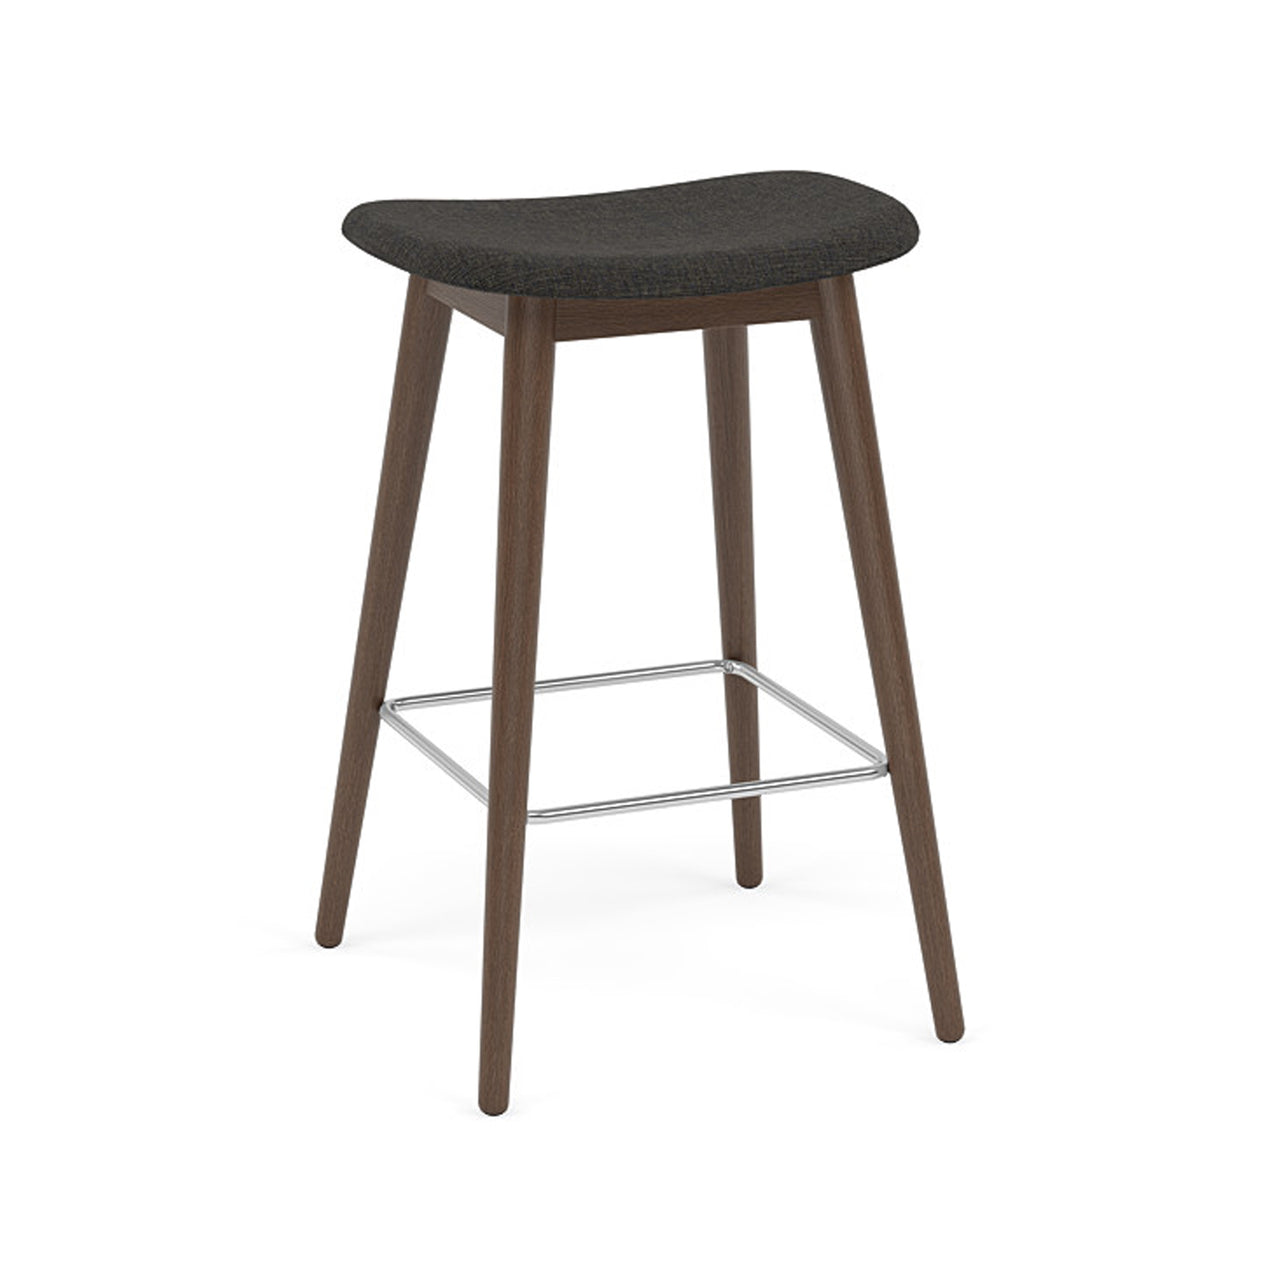 Fiber Bar + Counter Stool: Wood Base + Upholstered + Counter + Stained Dark Brown